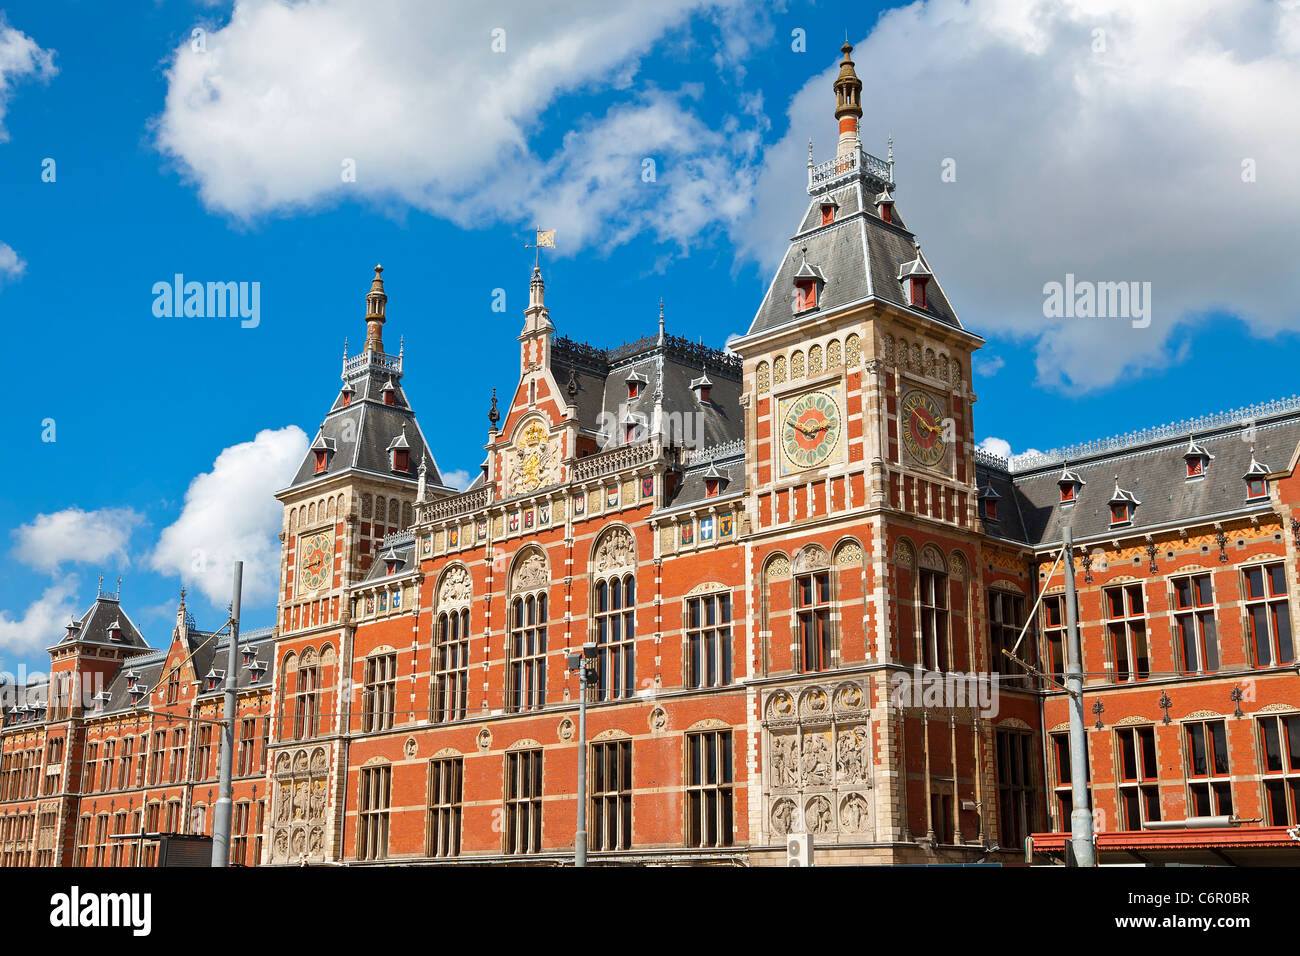 Europe, Netherlands, Amsterdam, centraal Station Stock Photo